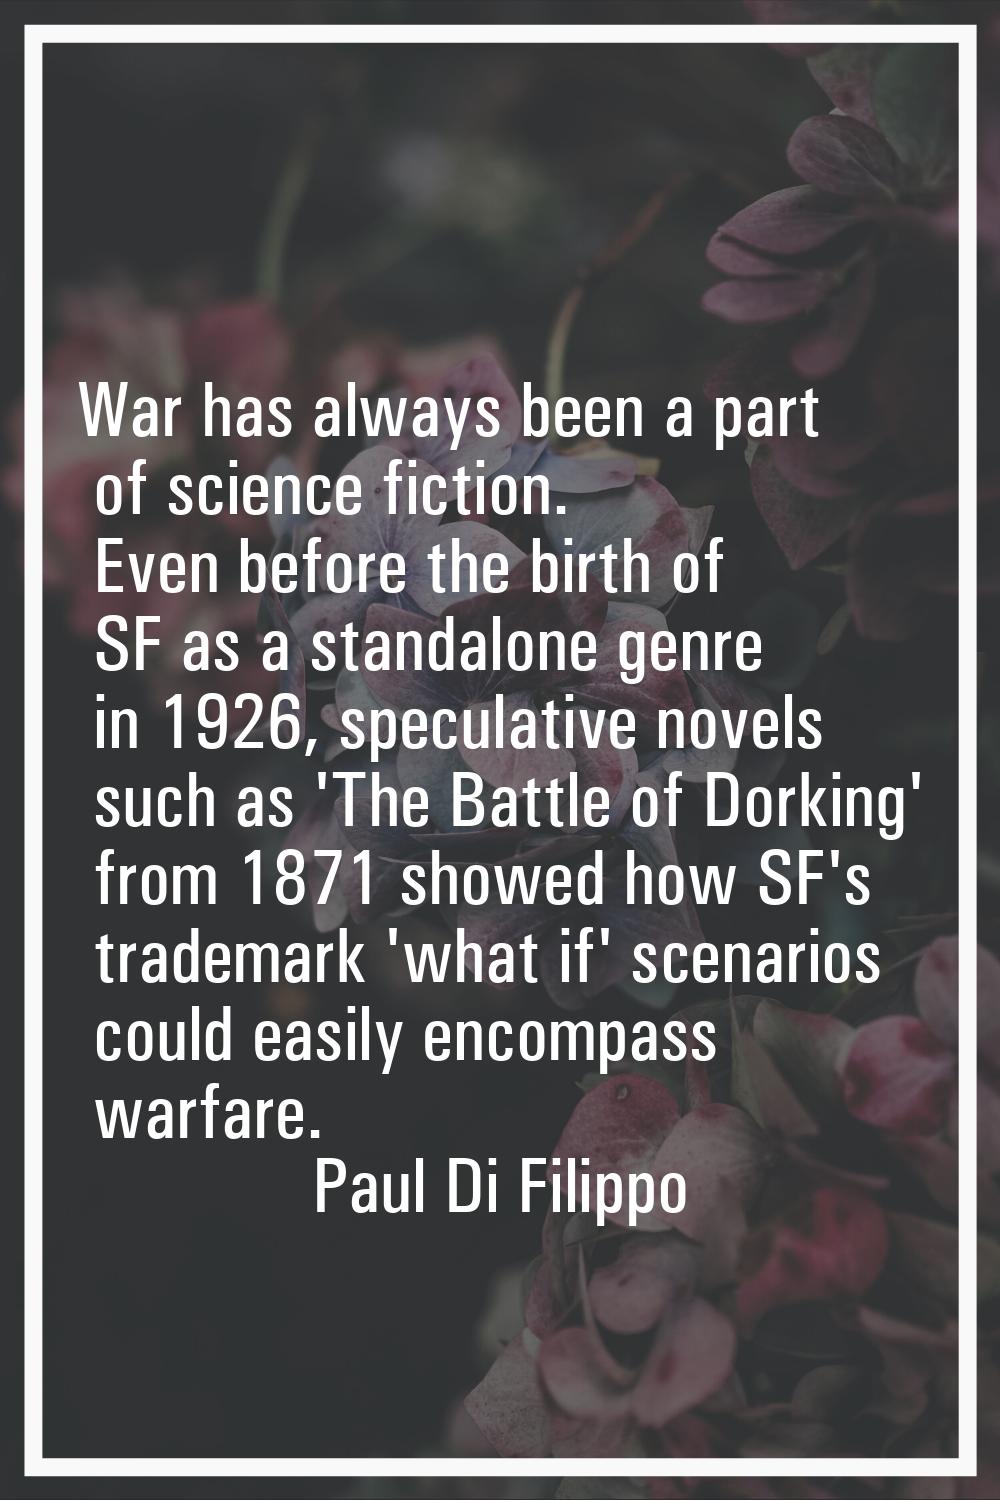 War has always been a part of science fiction. Even before the birth of SF as a standalone genre in